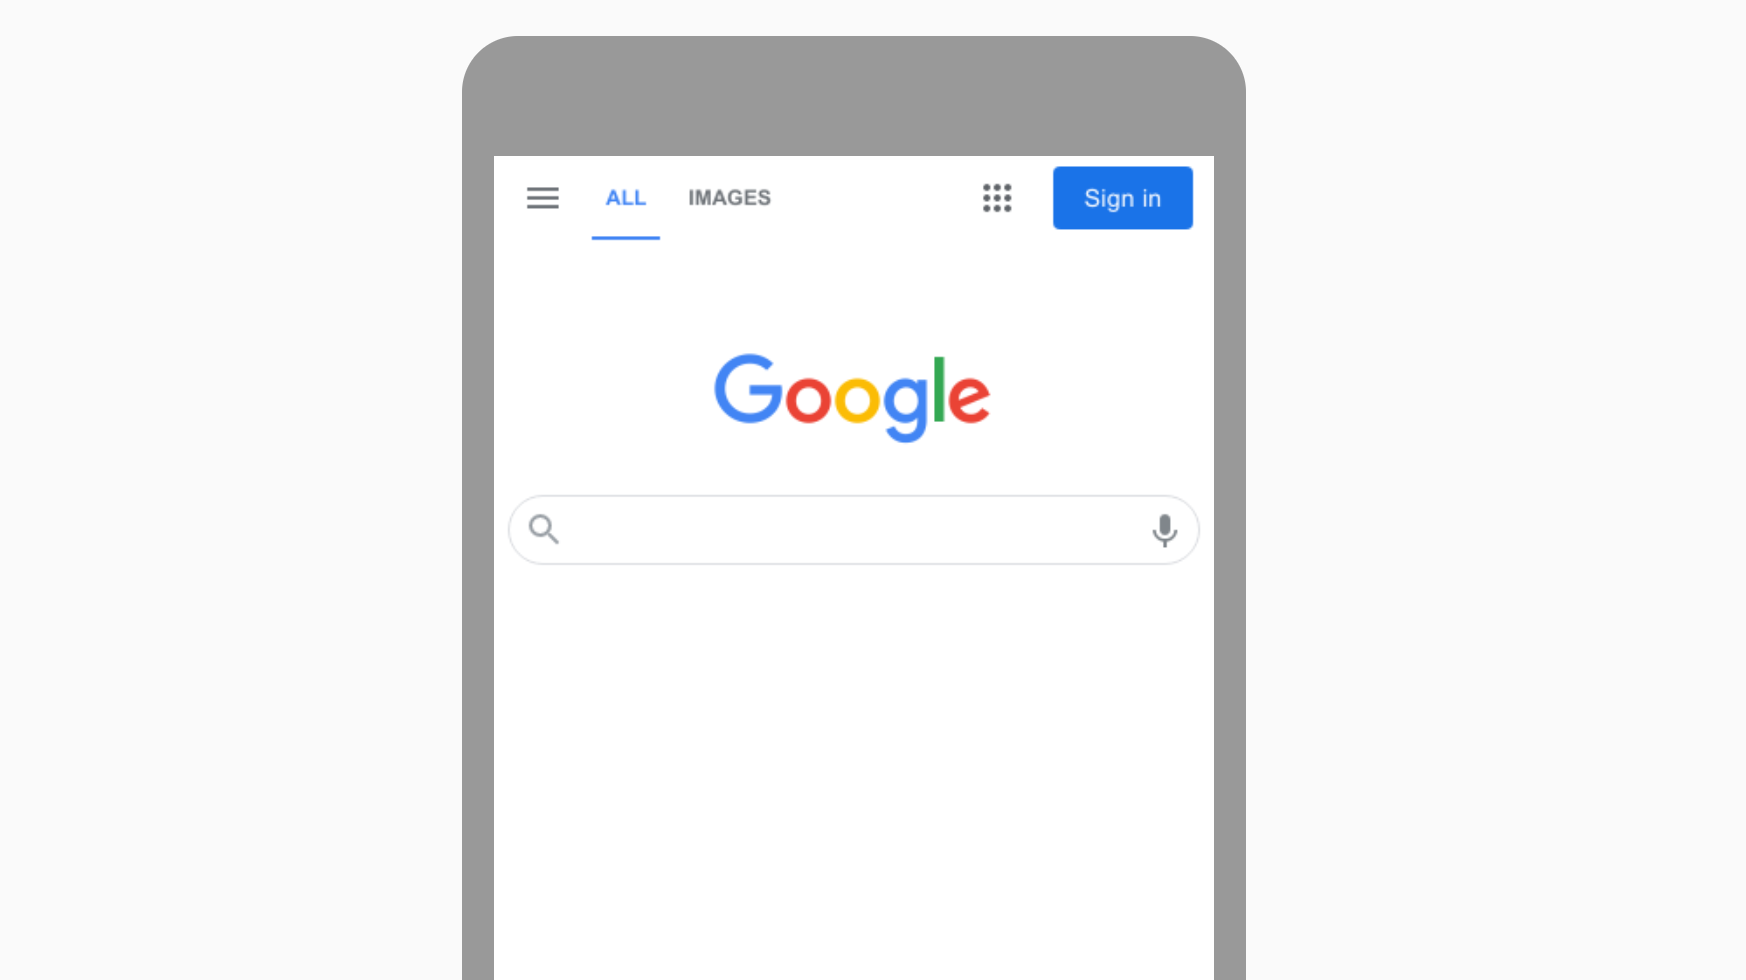 Google Mobile First Indexing